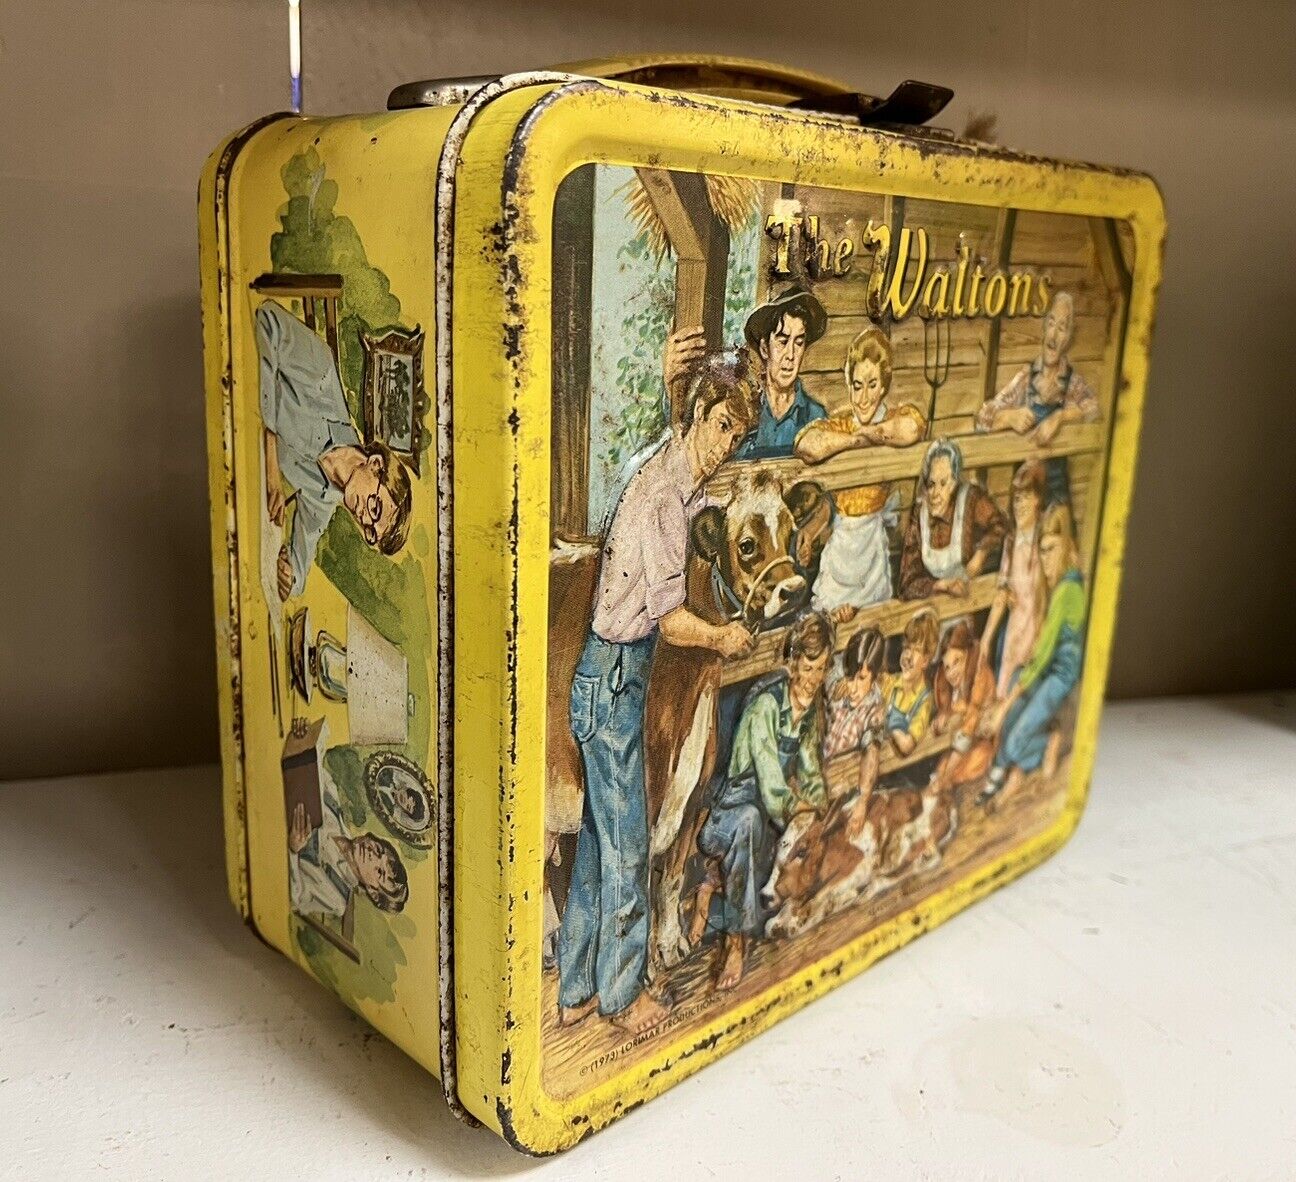 VINTAGE 1970s ALADDIN THE WALTONS TV SERIES YELLOW METAL LUNCH BOX No Thermos